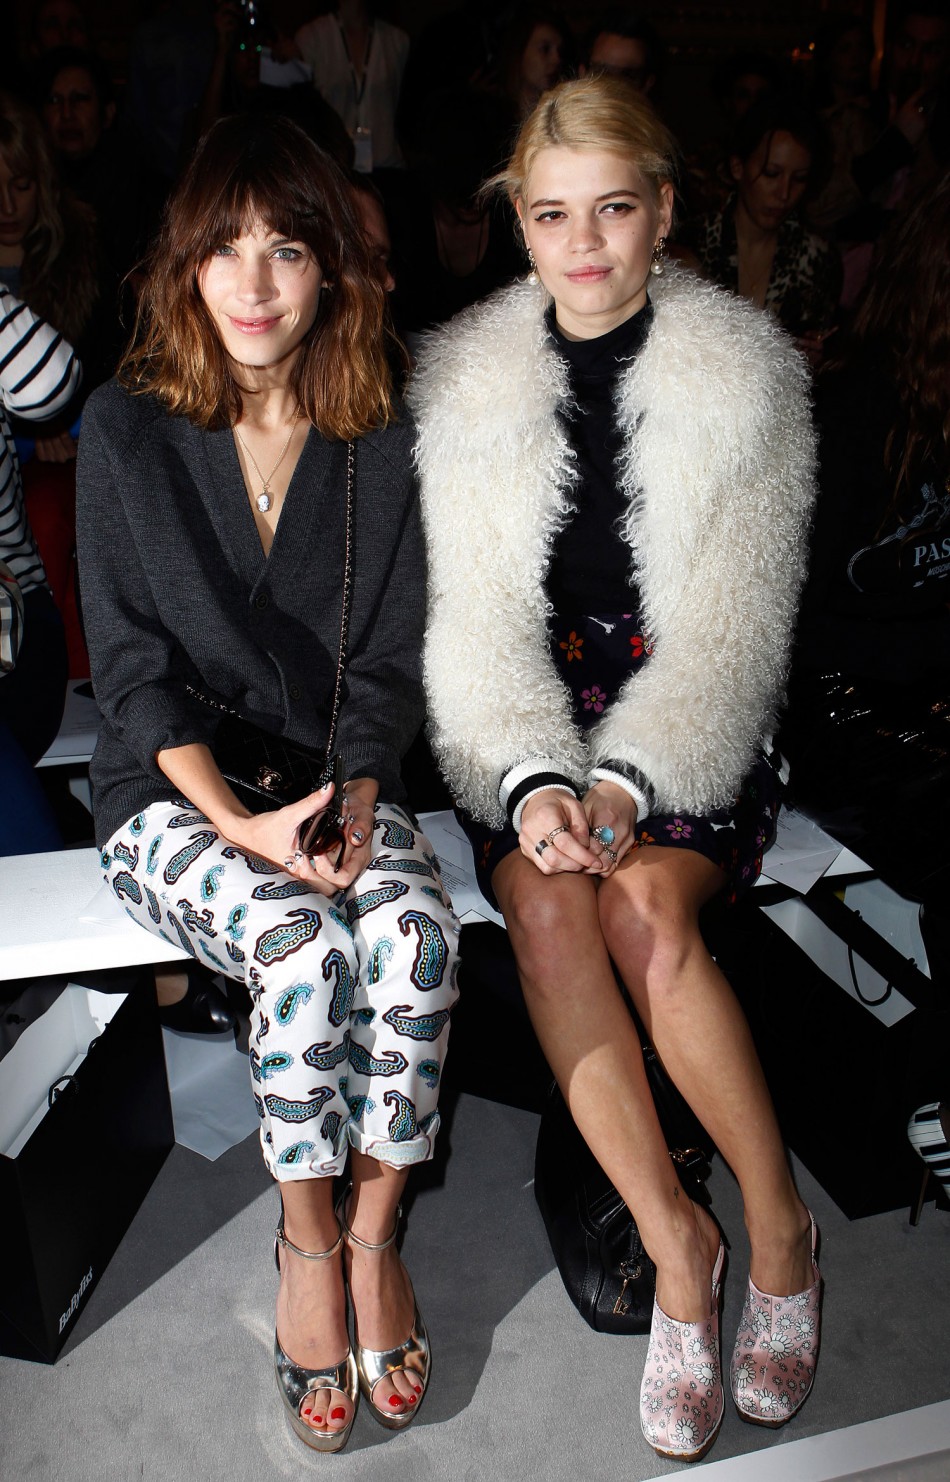 London Fashion Week 2012 Front Rows and Celebrities [PHOTOS]